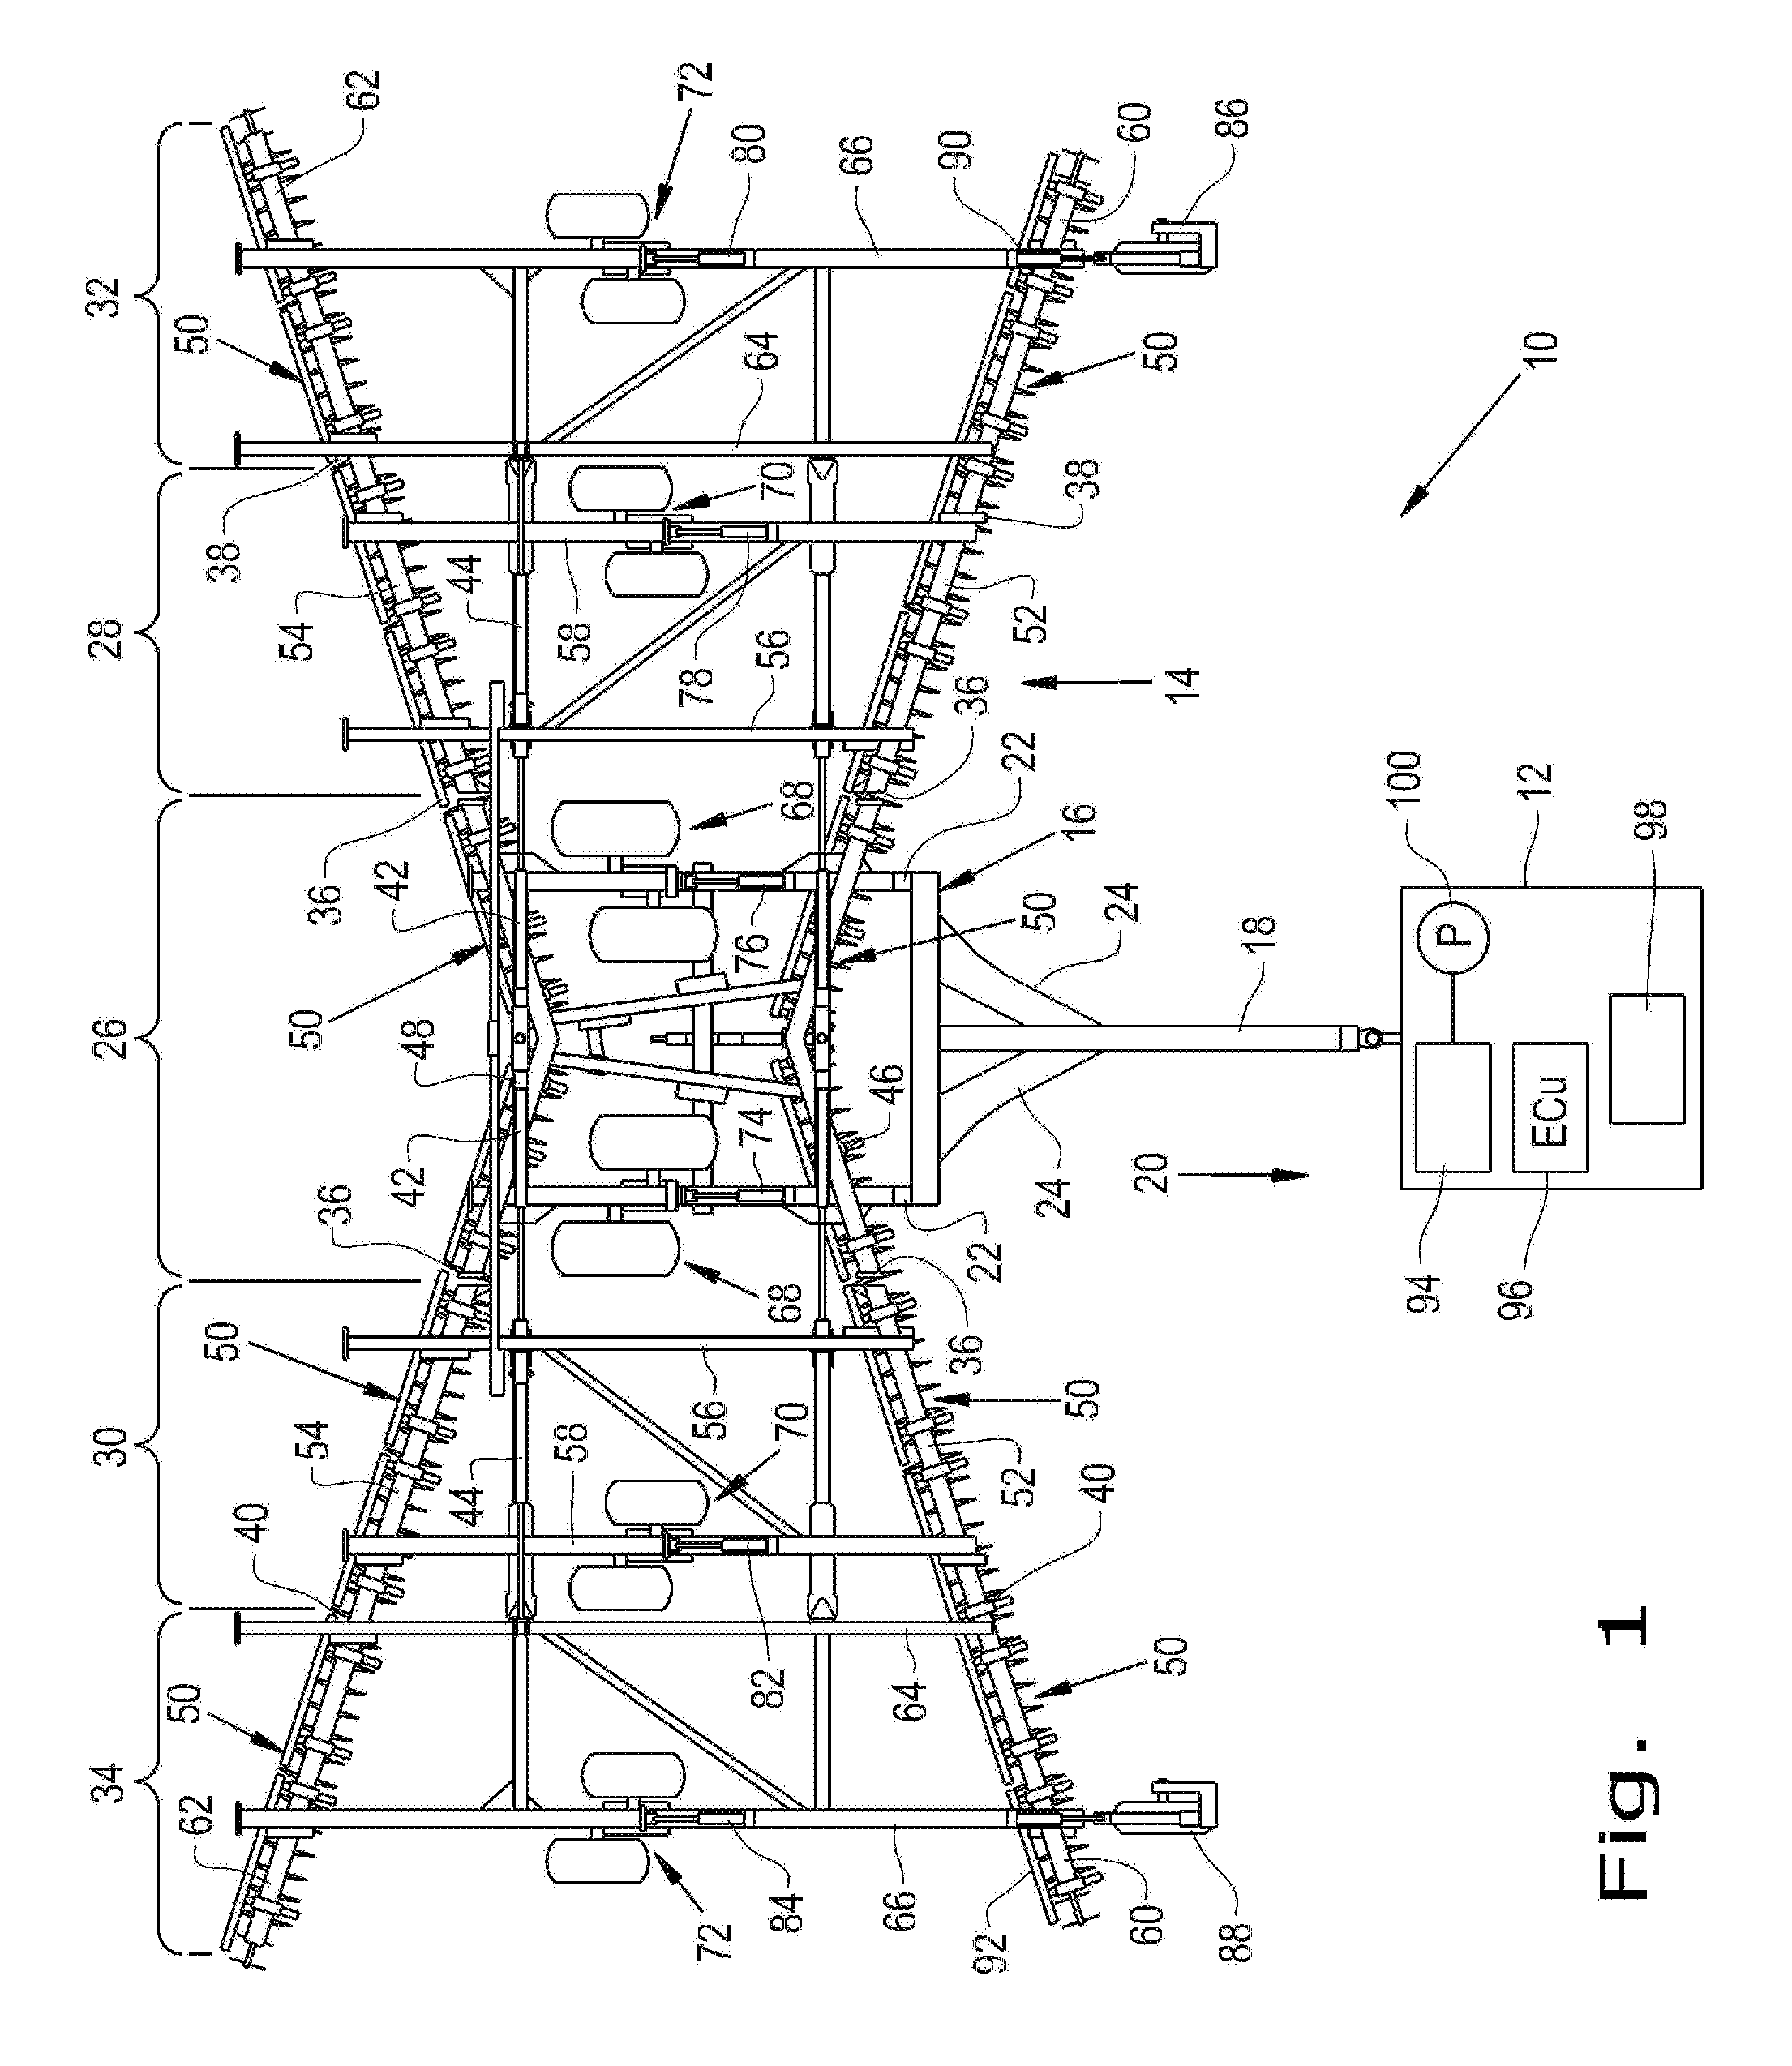 Apparatus and method for air removal in tillage implements using three way valves